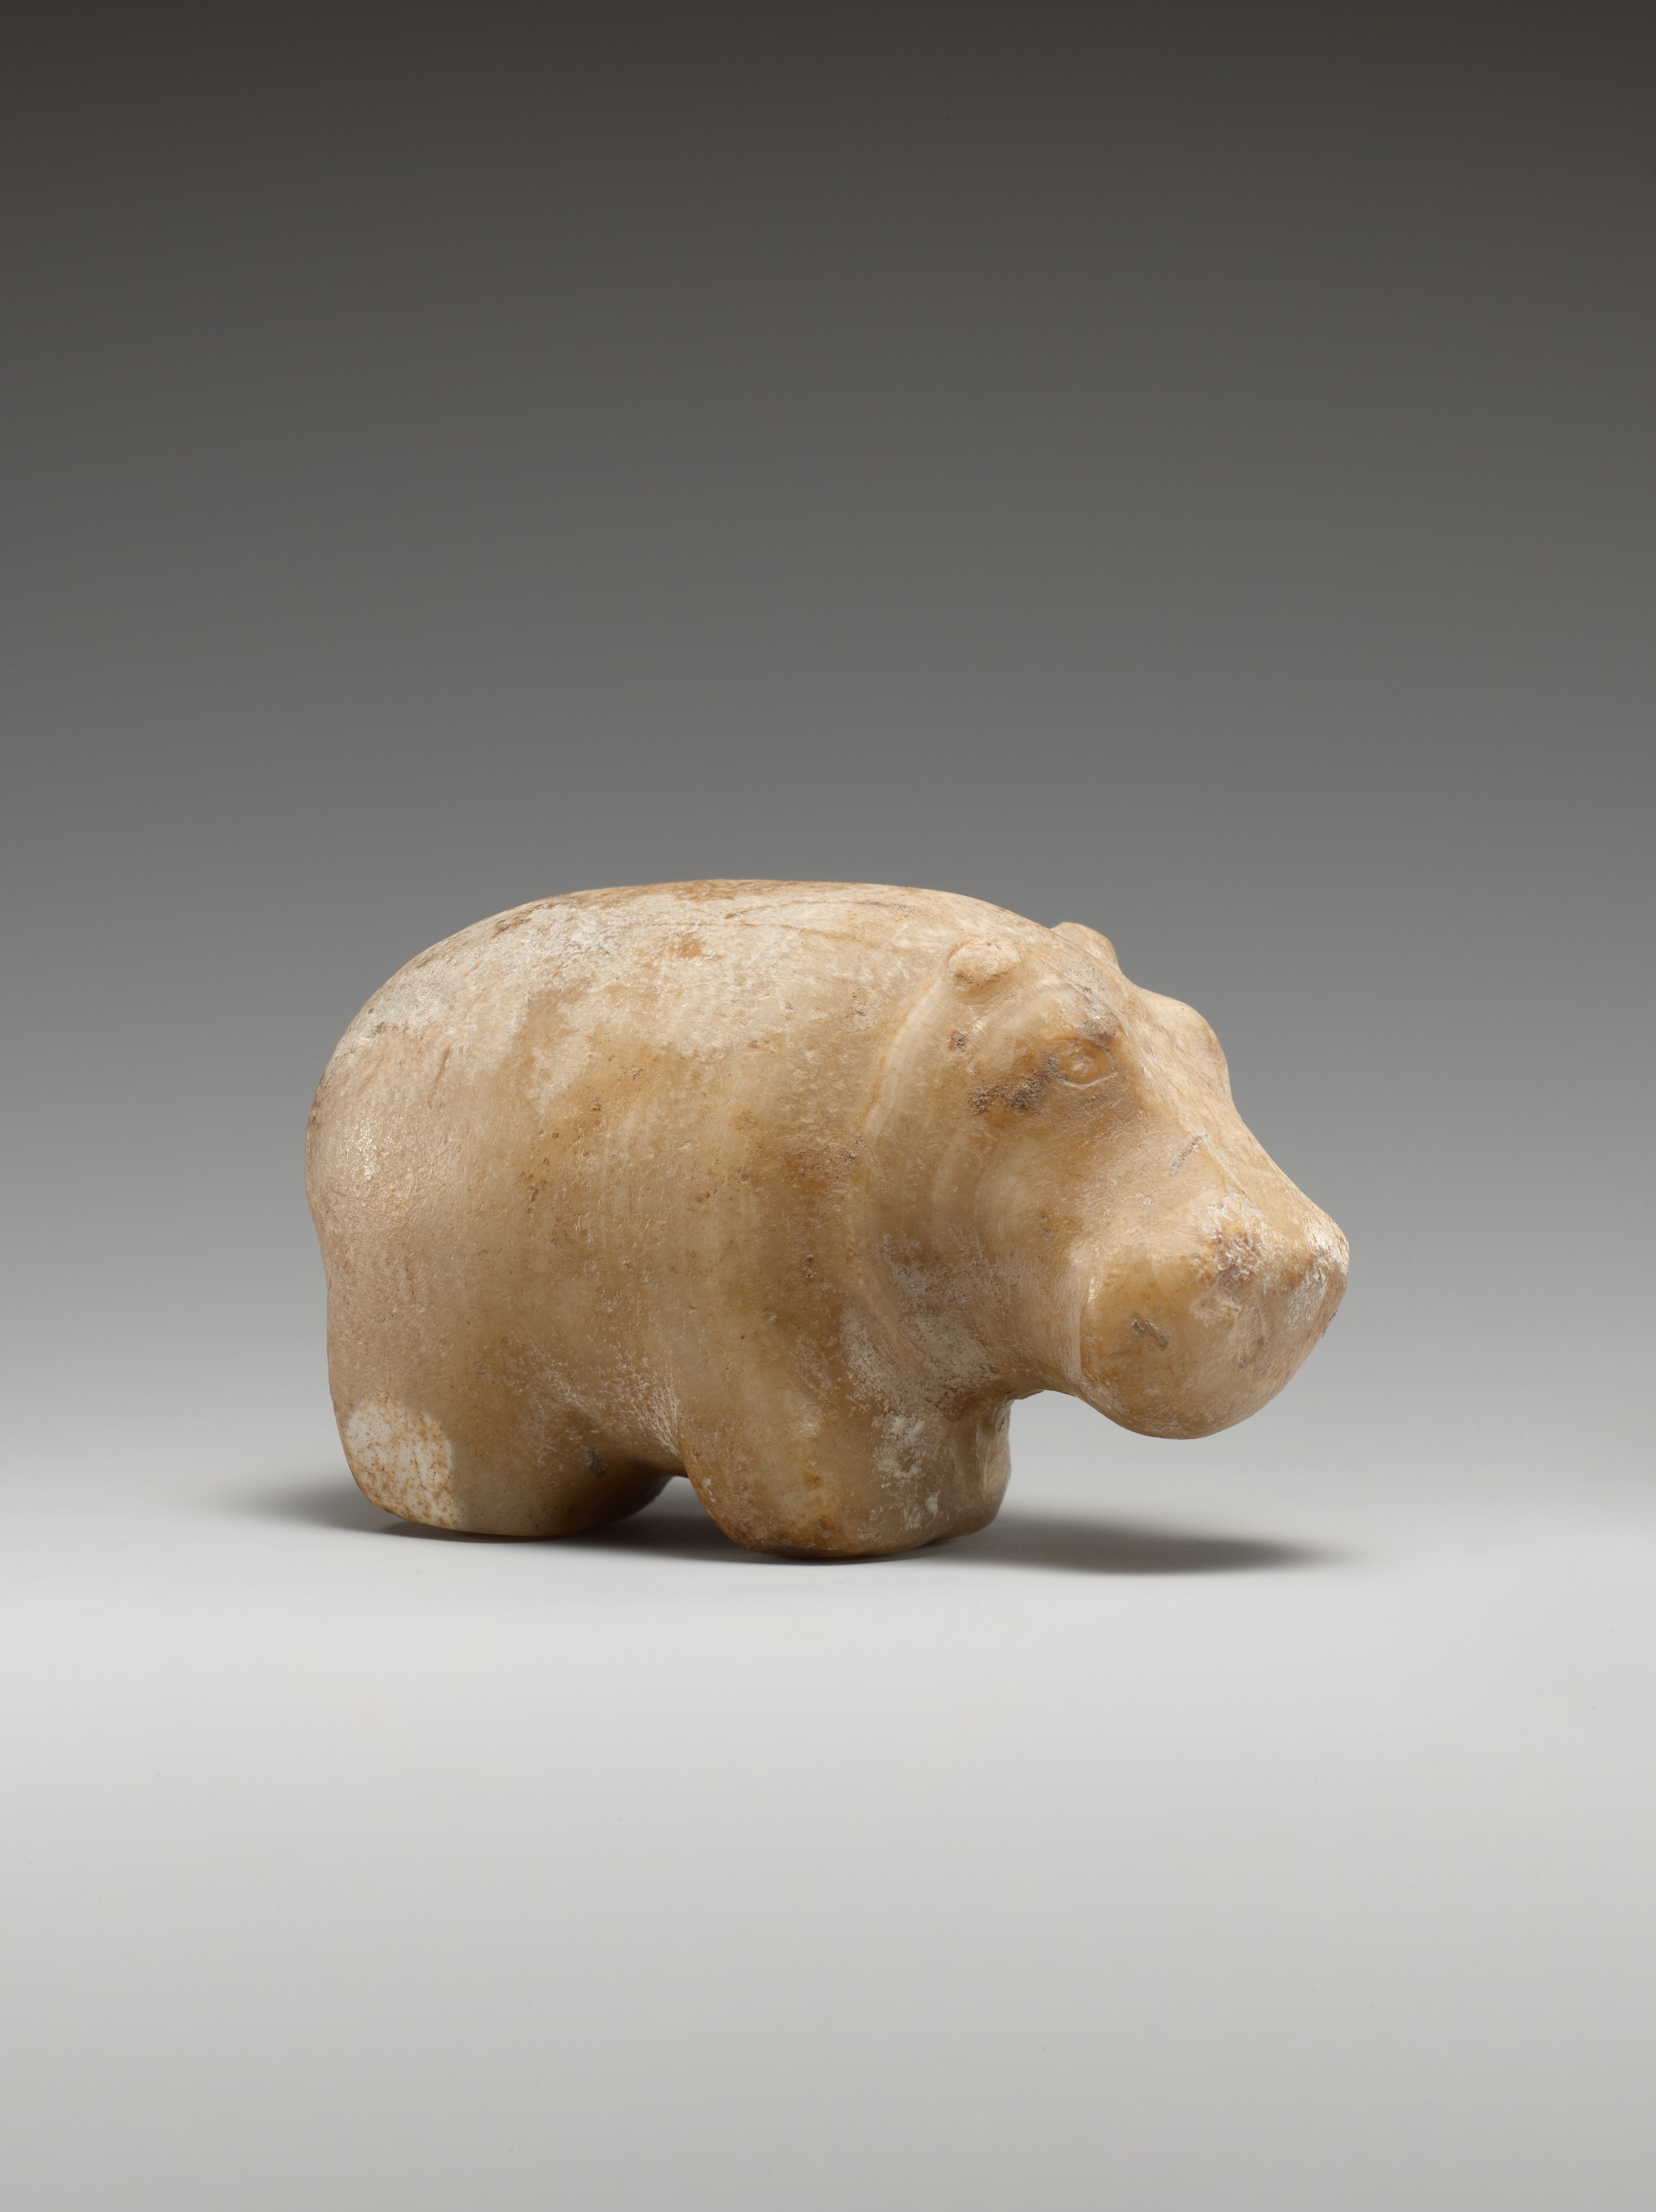 Small statuette of a hippopotamus, Early Dynastic Period